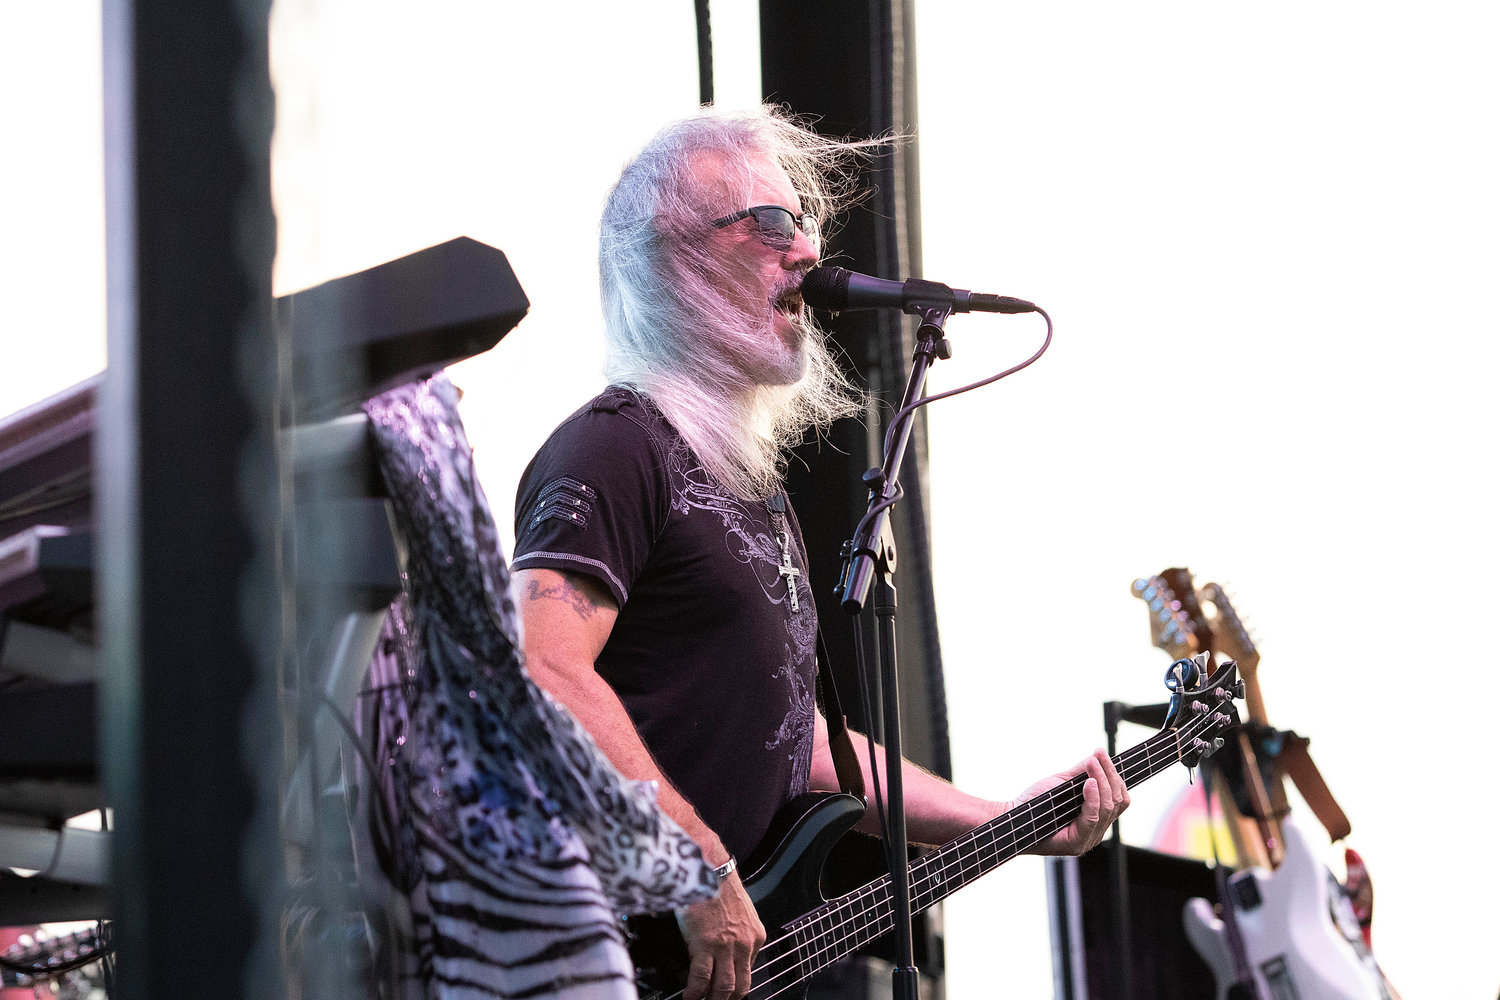 Bassist Tom Walason sings back up vocals during the band's cover of Bon Jovi's "Living on a Prayer."